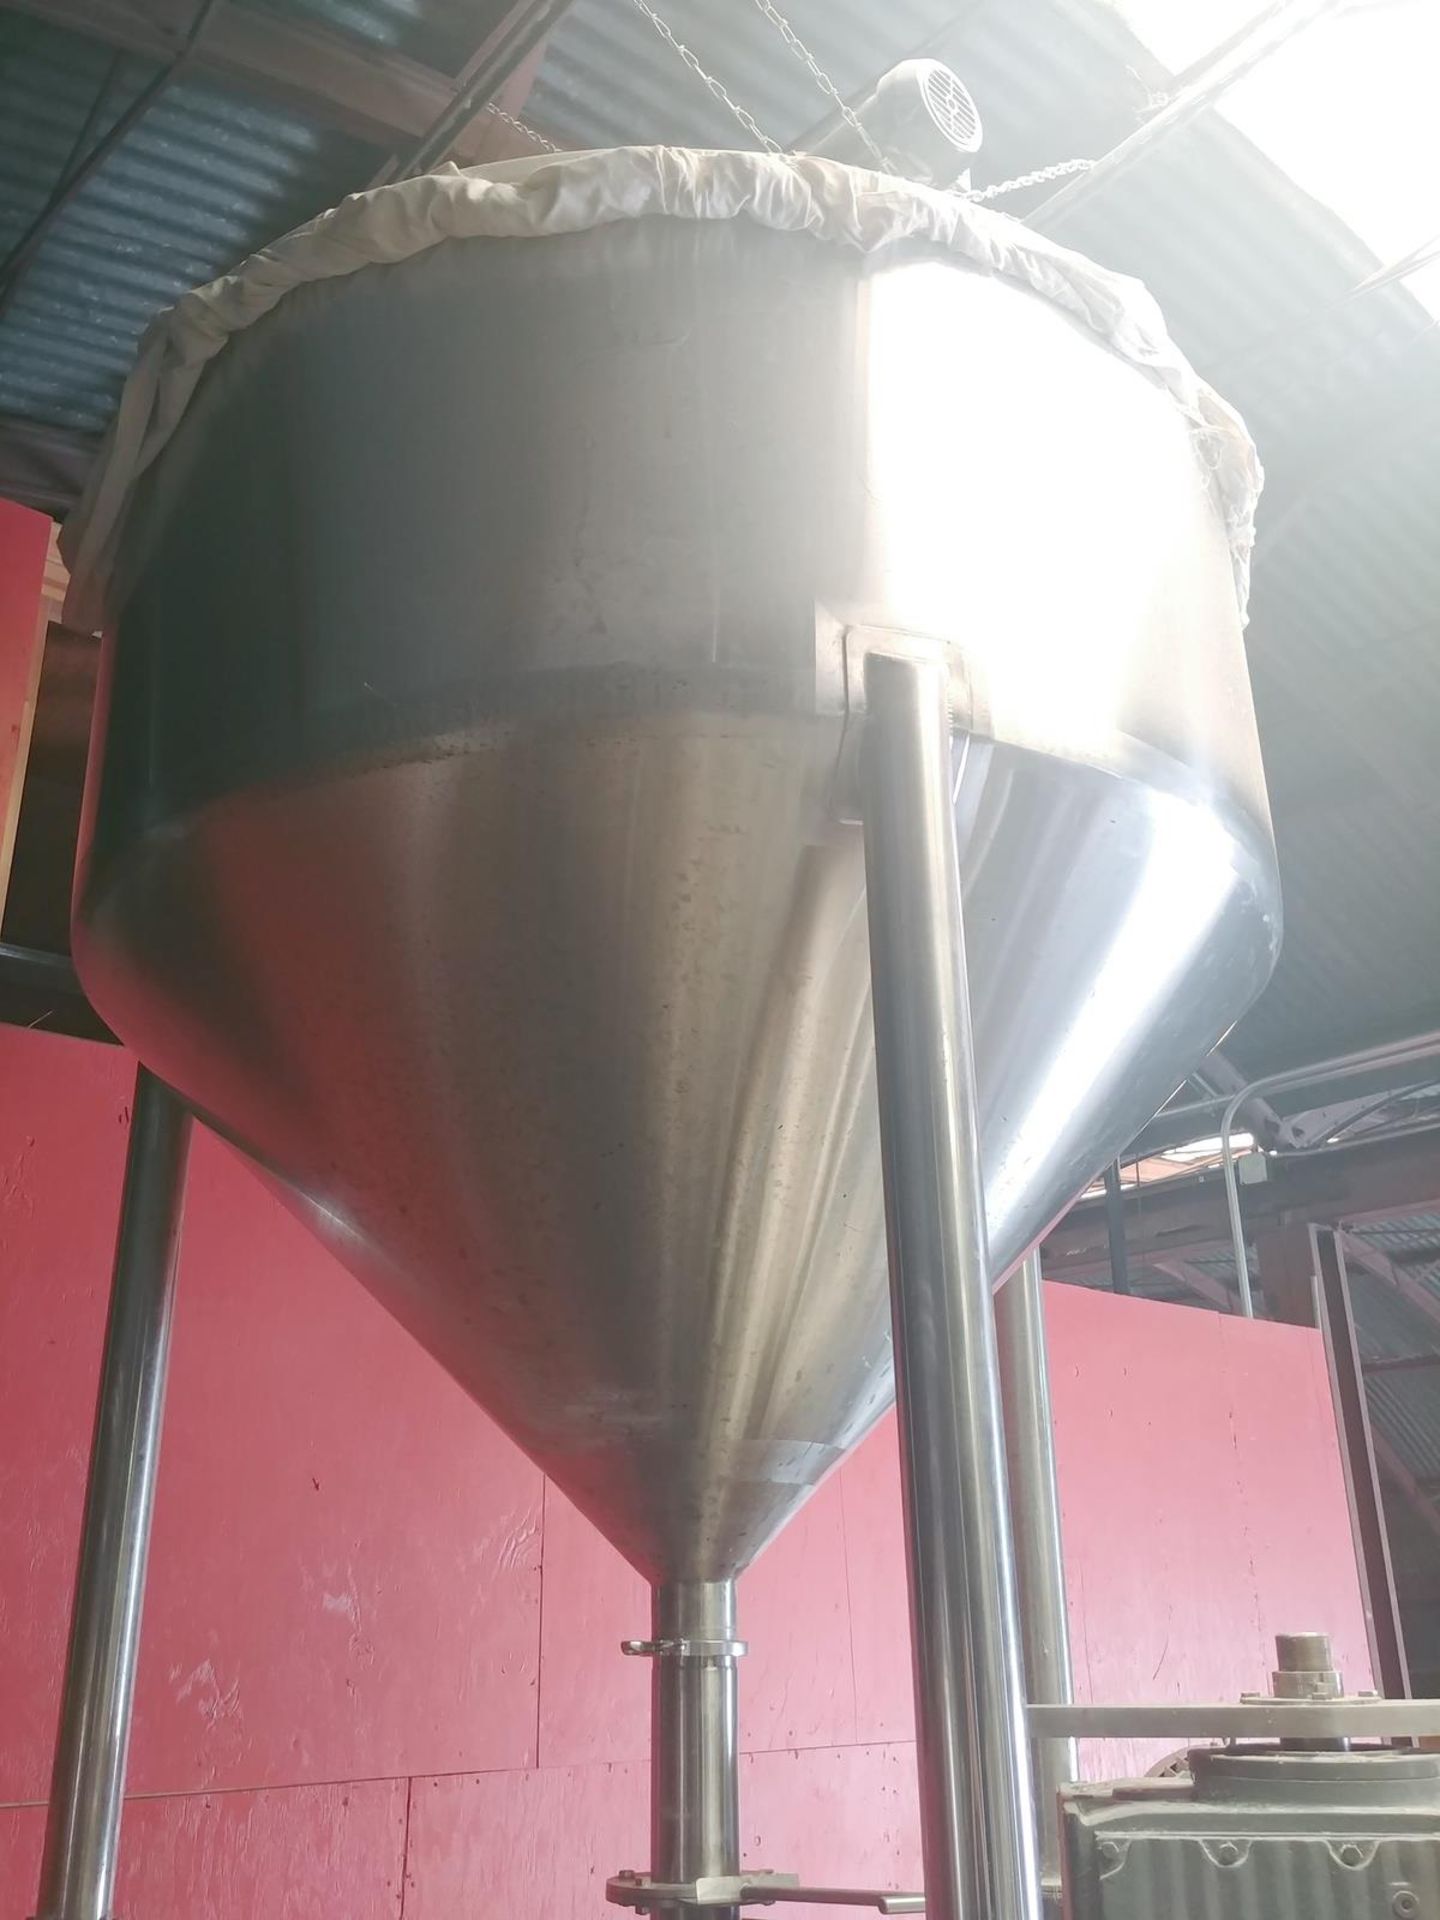 2013 Pacific Brewing 30 BBL 3-Vessel Brewhouse + Hot Liquor Tank - Sub to Bulk | Reqd Rig Fee: $6500 - Image 6 of 31